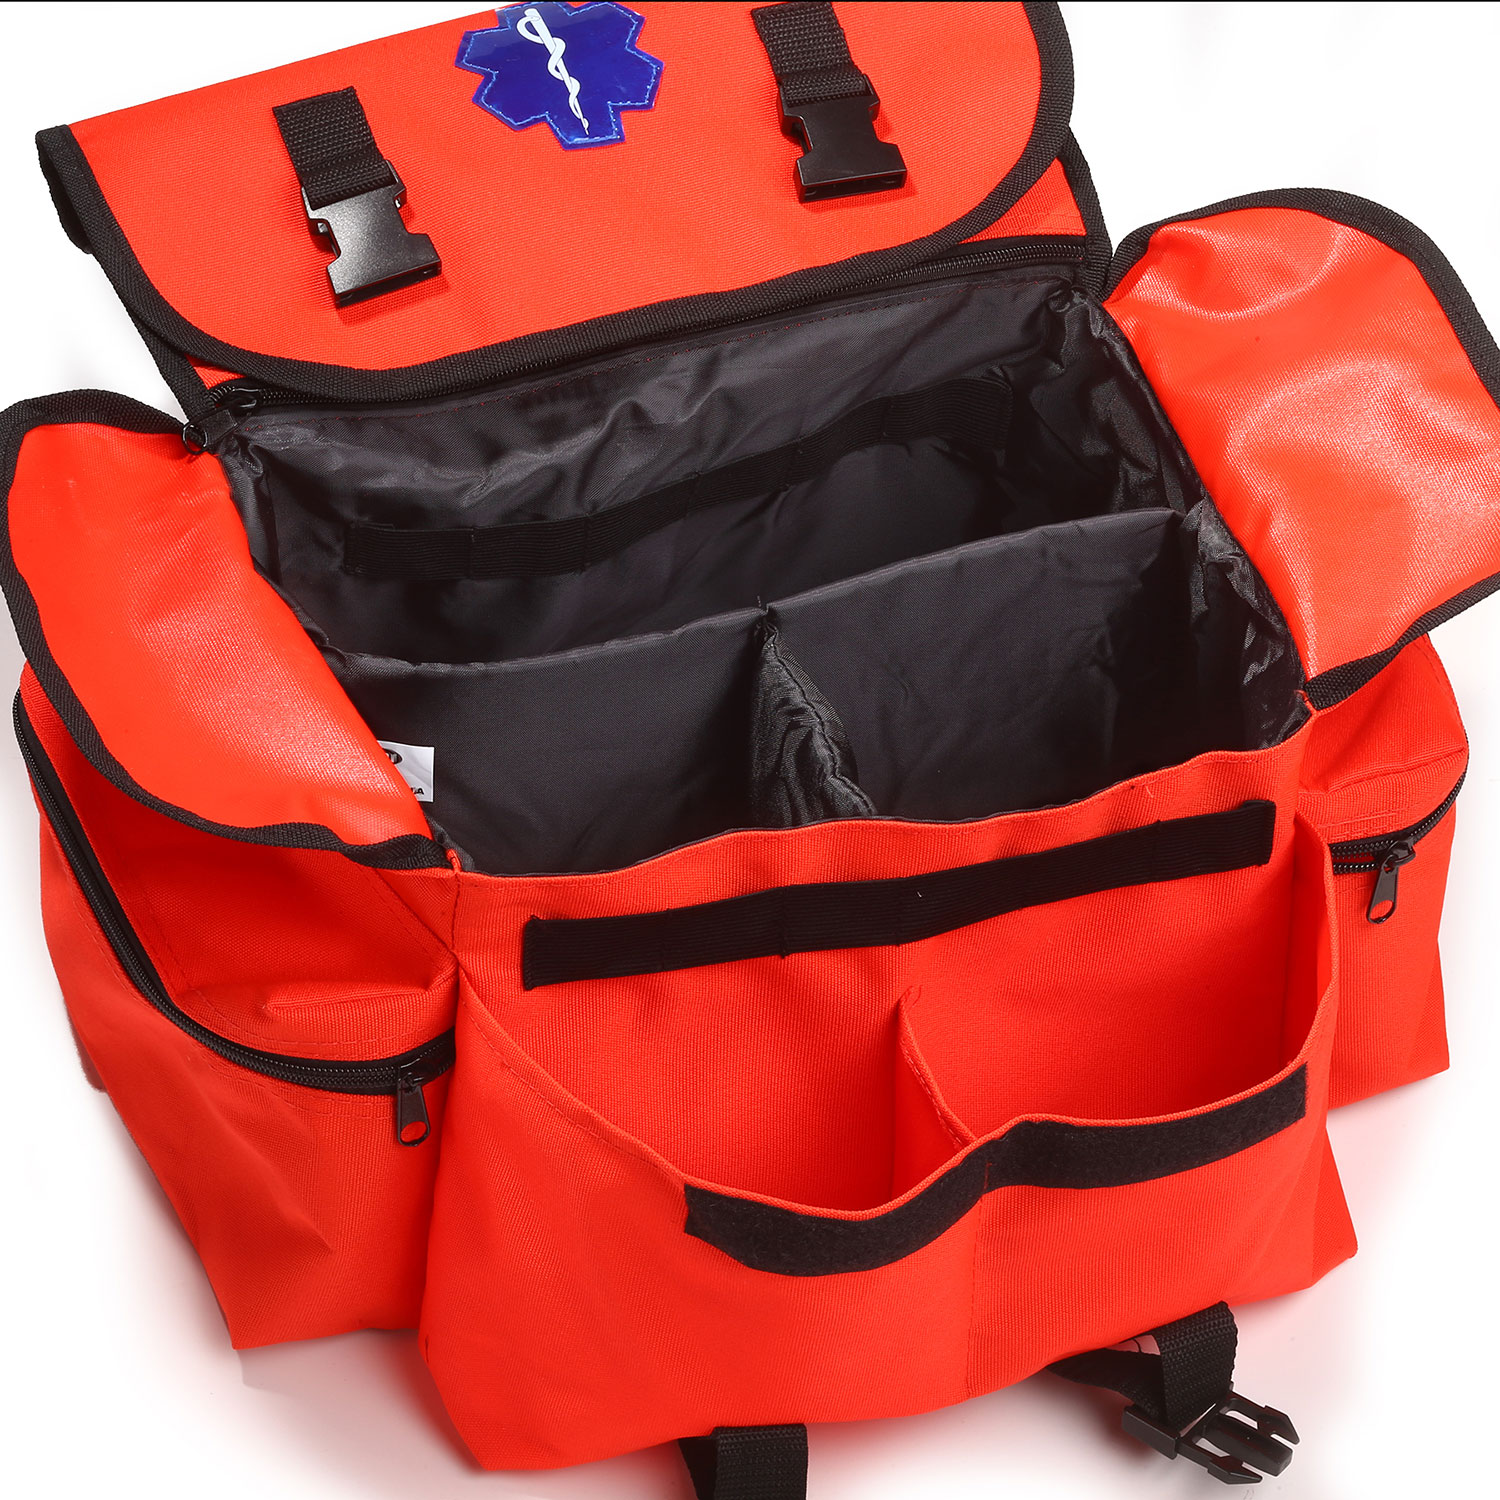 EMI Pro Response Complete First Aid Kit